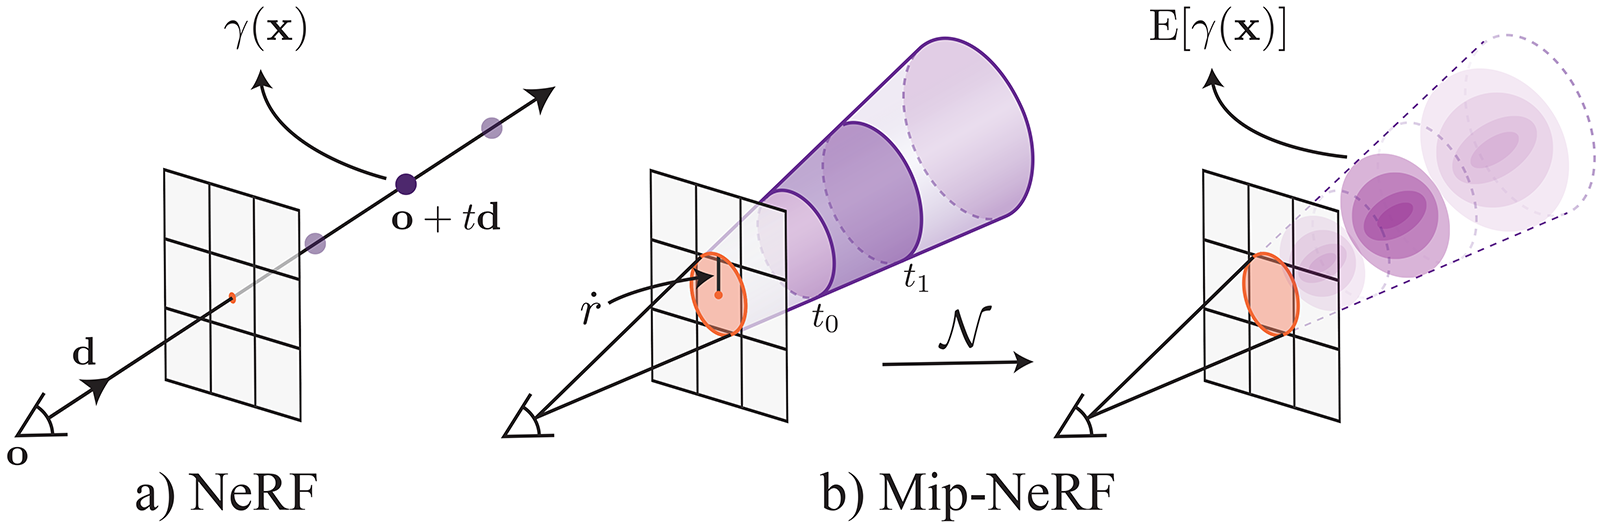 Mip-NeRF deals with aliasing by replacing sampling the light field by integrating over conical sections along a the viewing rays